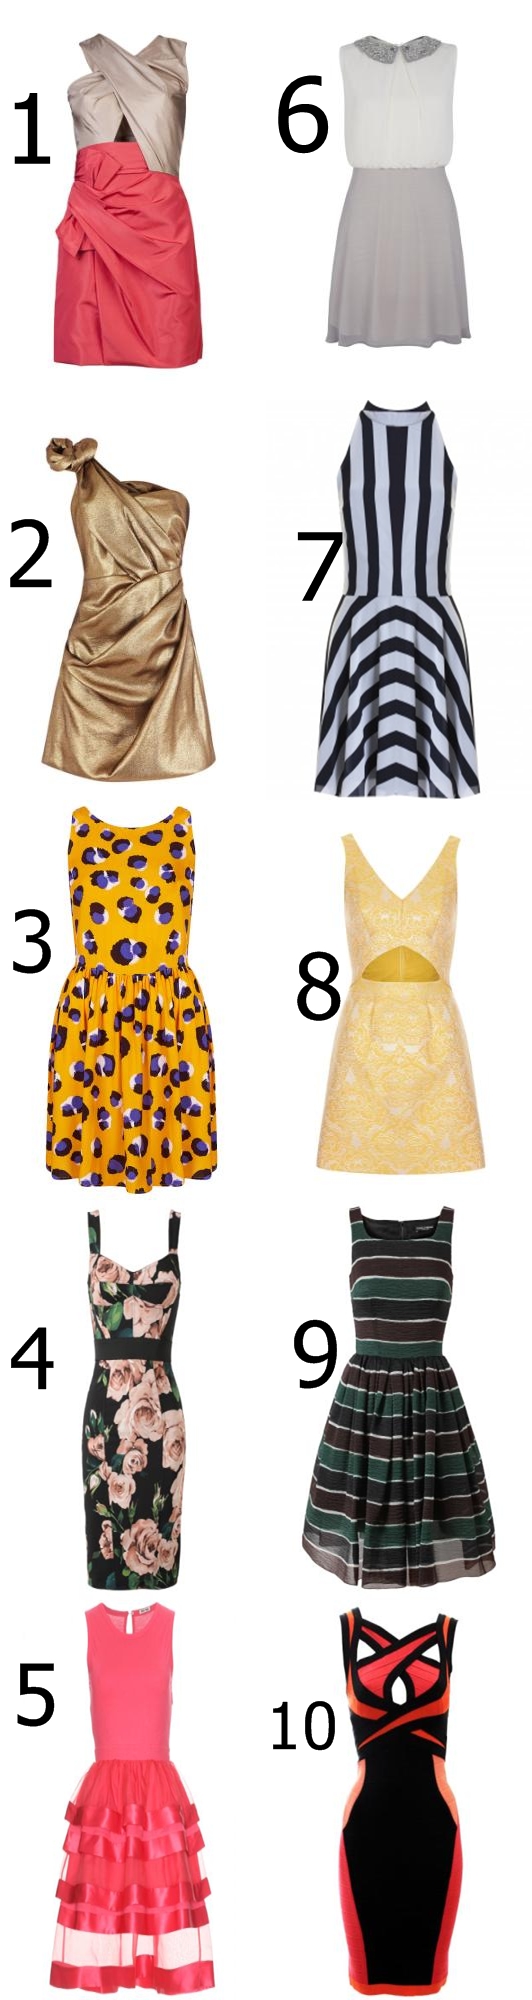 10 DRESSES TO DIE FOR